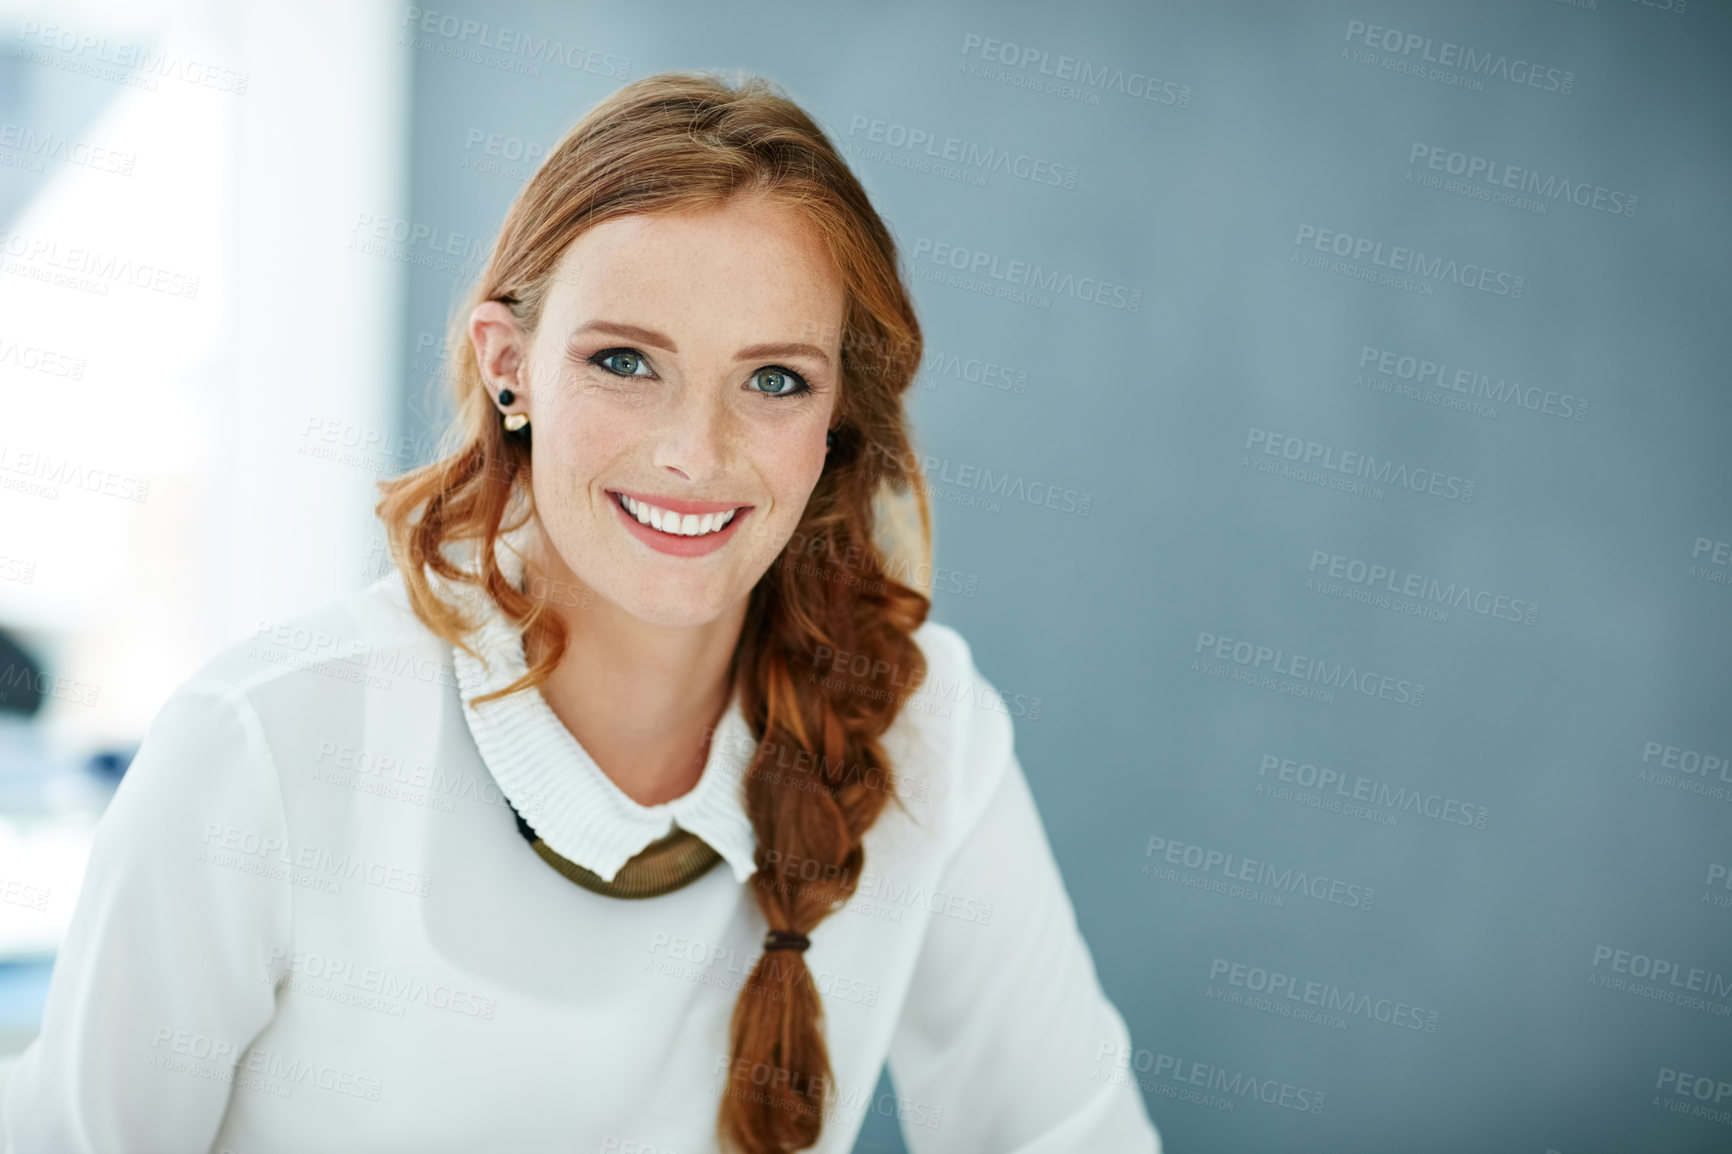 Buy stock photo Portrait of a young businesswoman sitting in an office